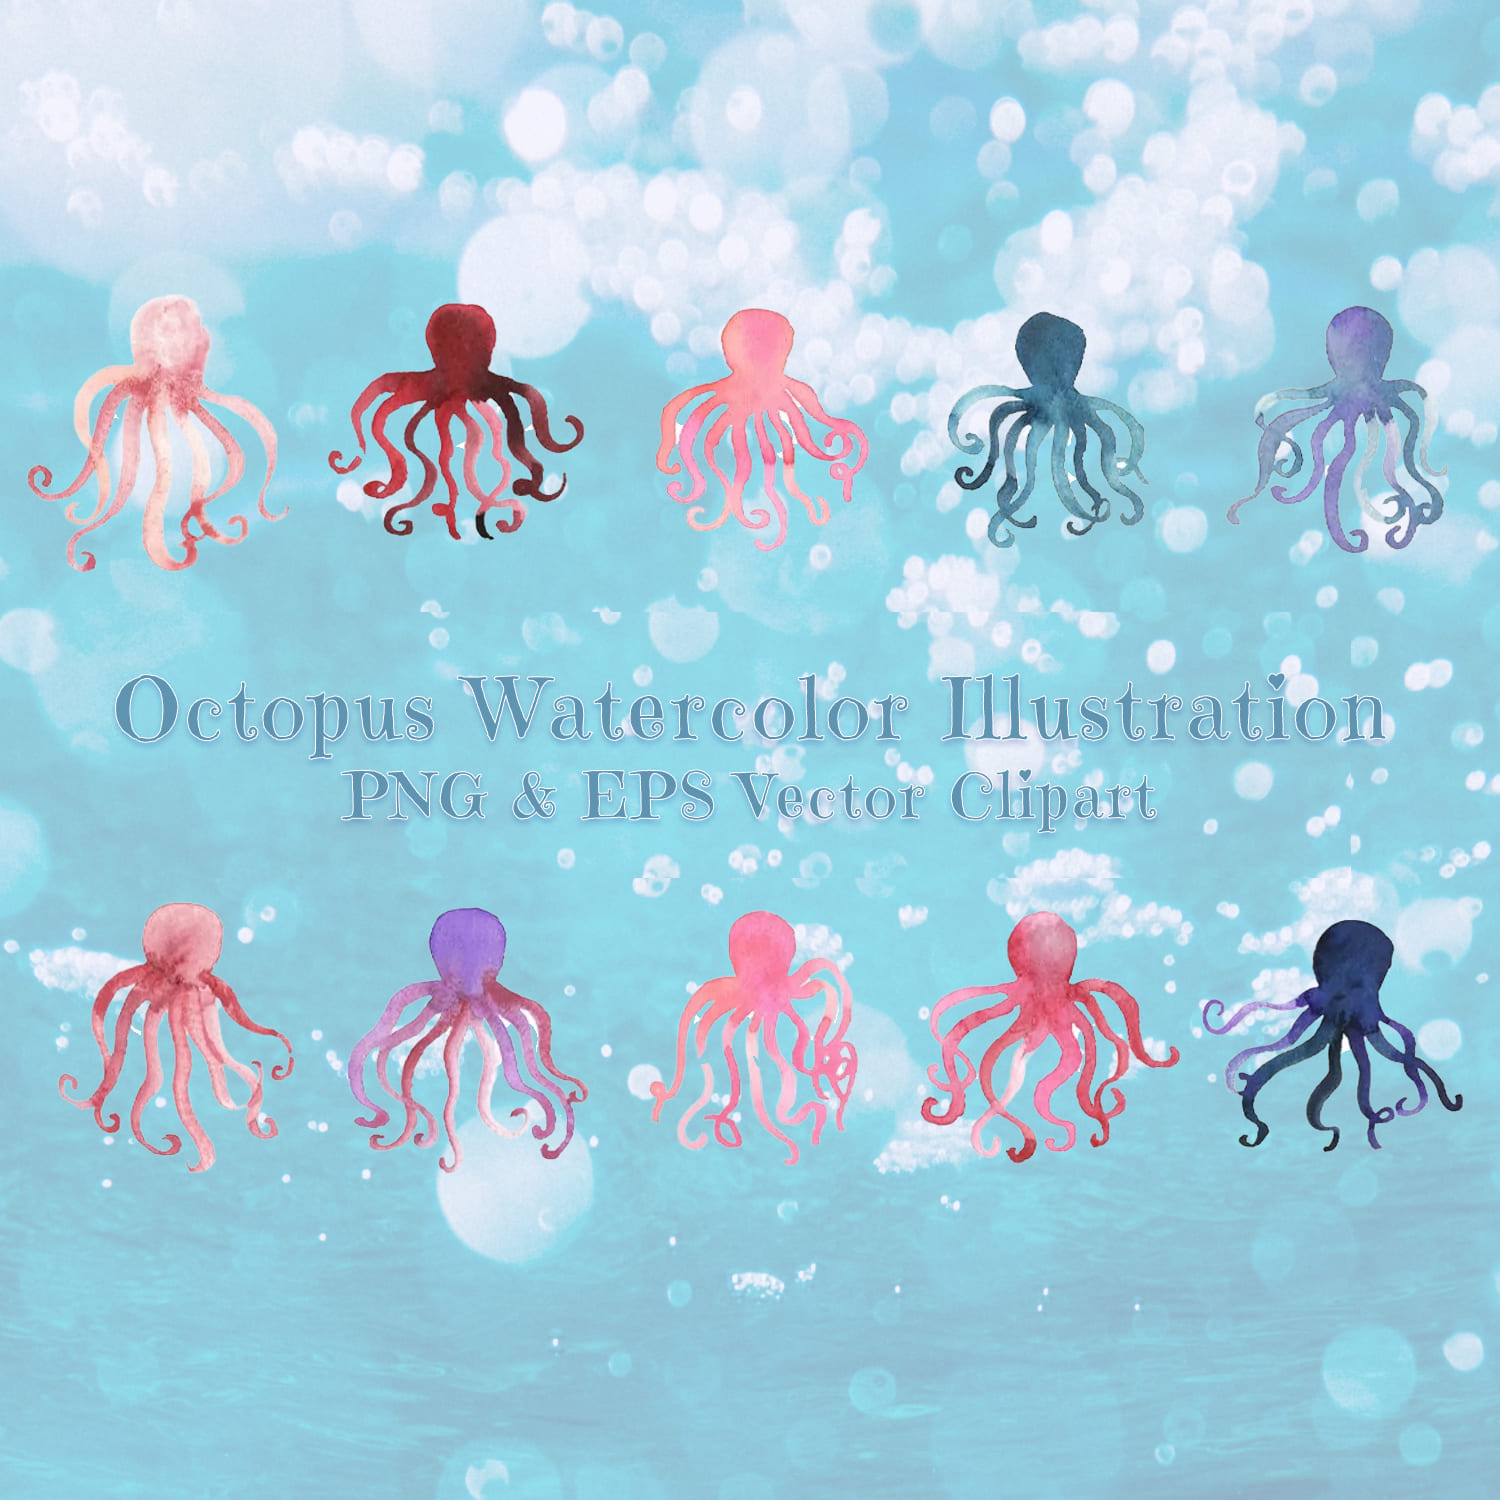 Octopus Watercolor Illustration |PNG & EPS Vector Clipart cover image.